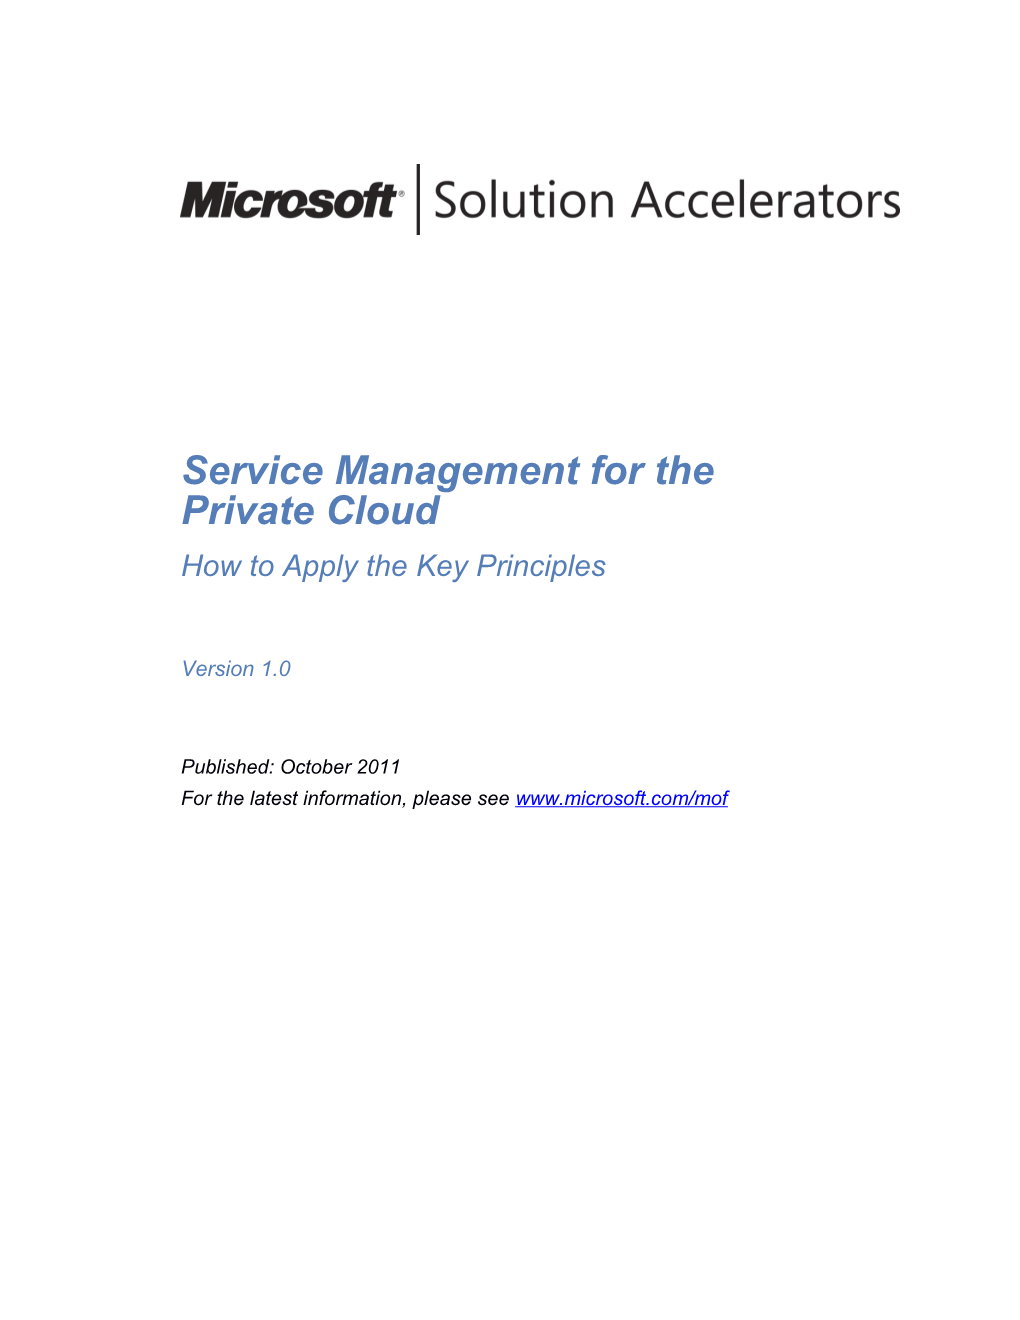 Service Management for the Private Cloud